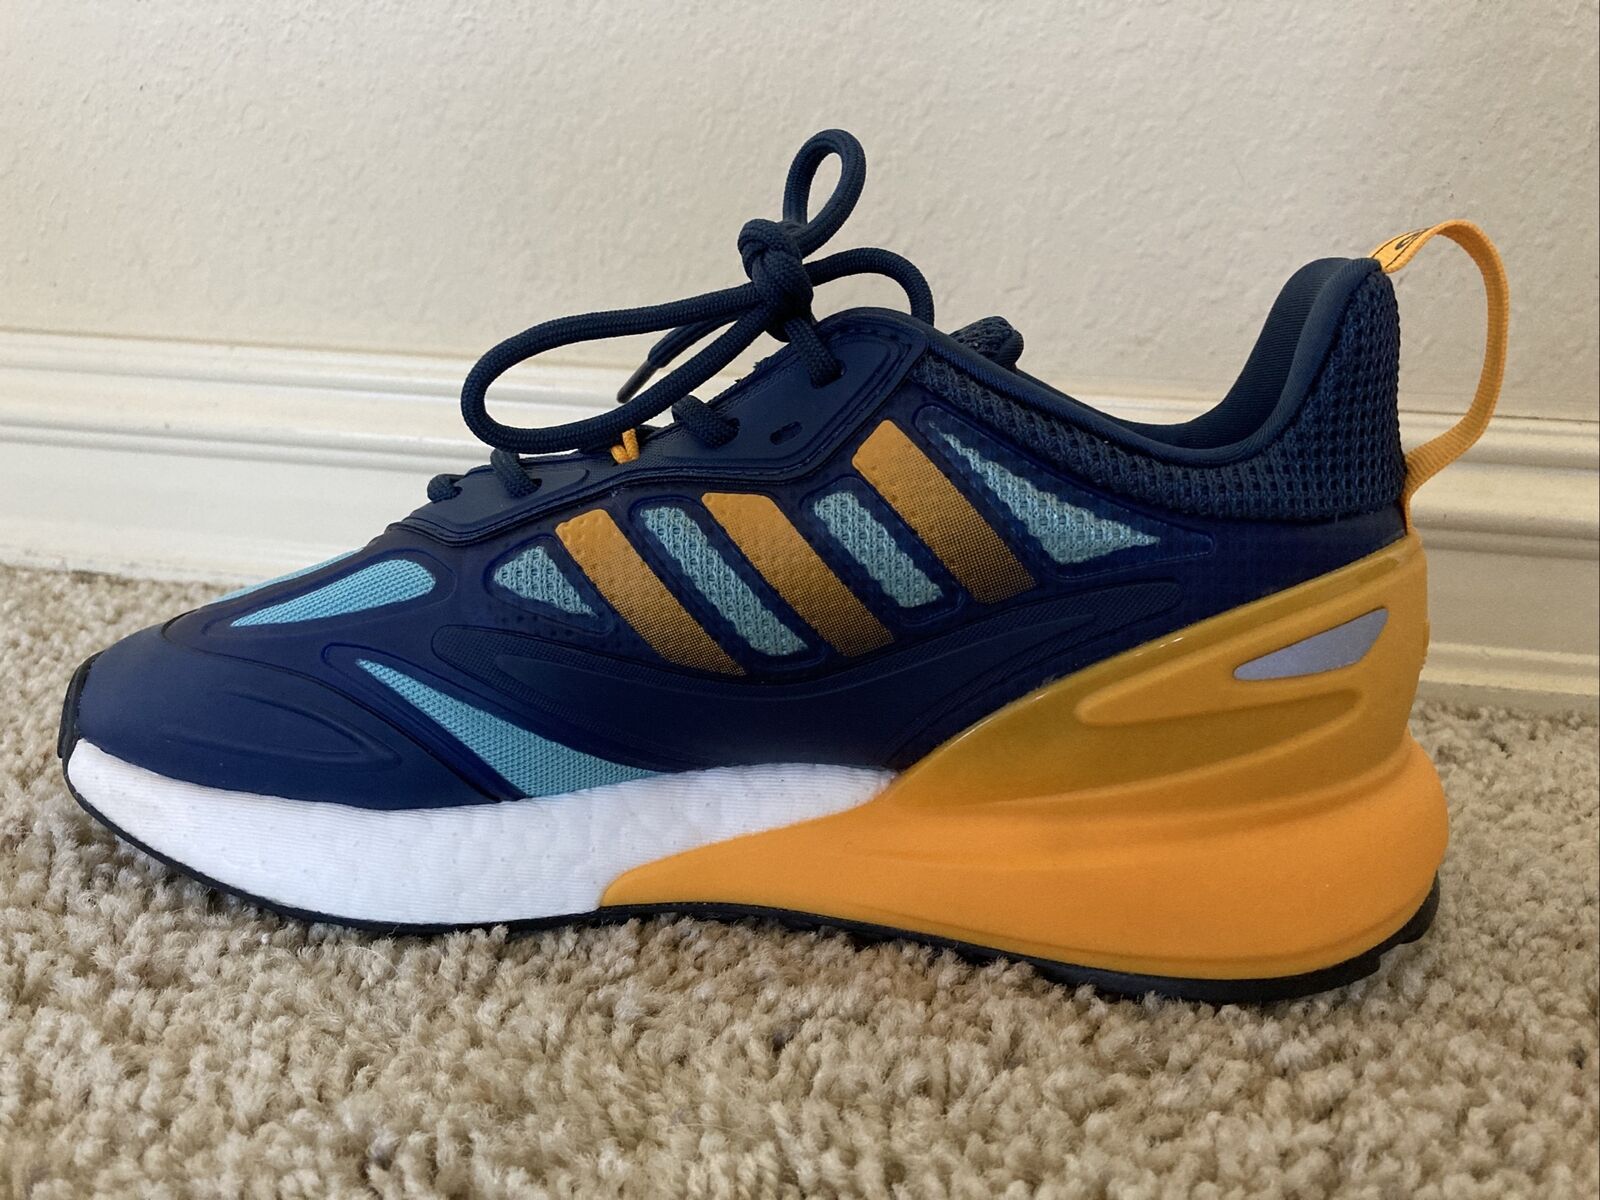 Adidas Oniginals ZX 2K Boost 2.0 Shoes Sneakers Blue Yellow 